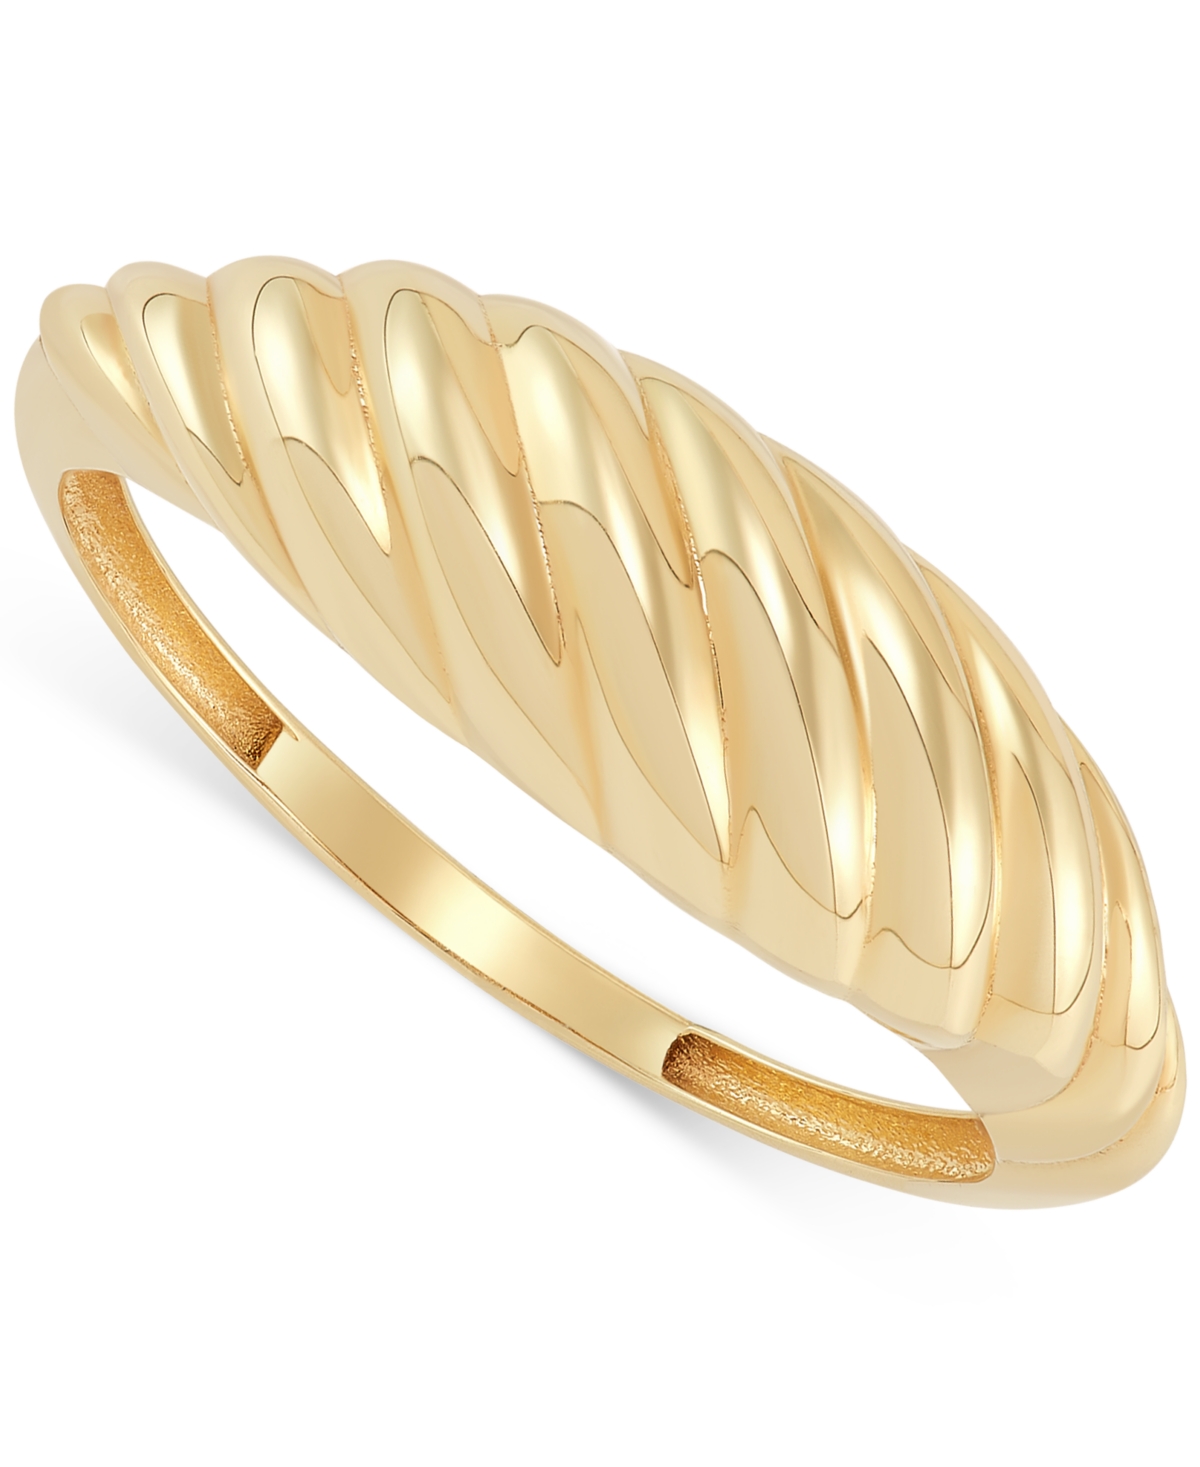 Polished Dome Croissant Ring in 10k Gold - Gold